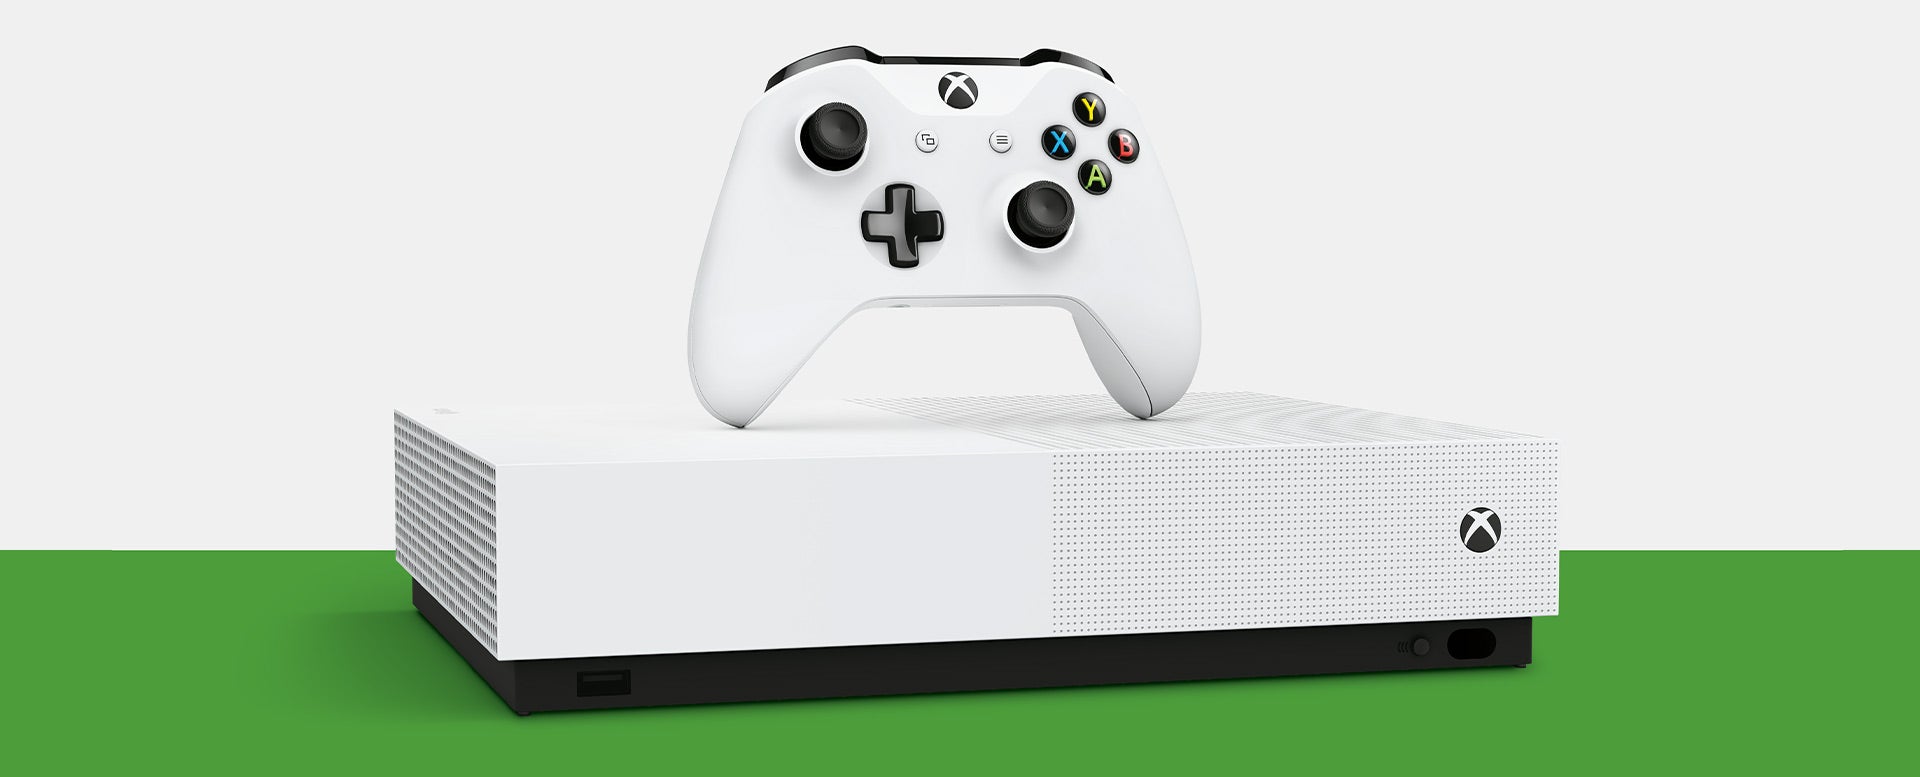 Image for Microsoft confirms Xbox One production ended in 2020